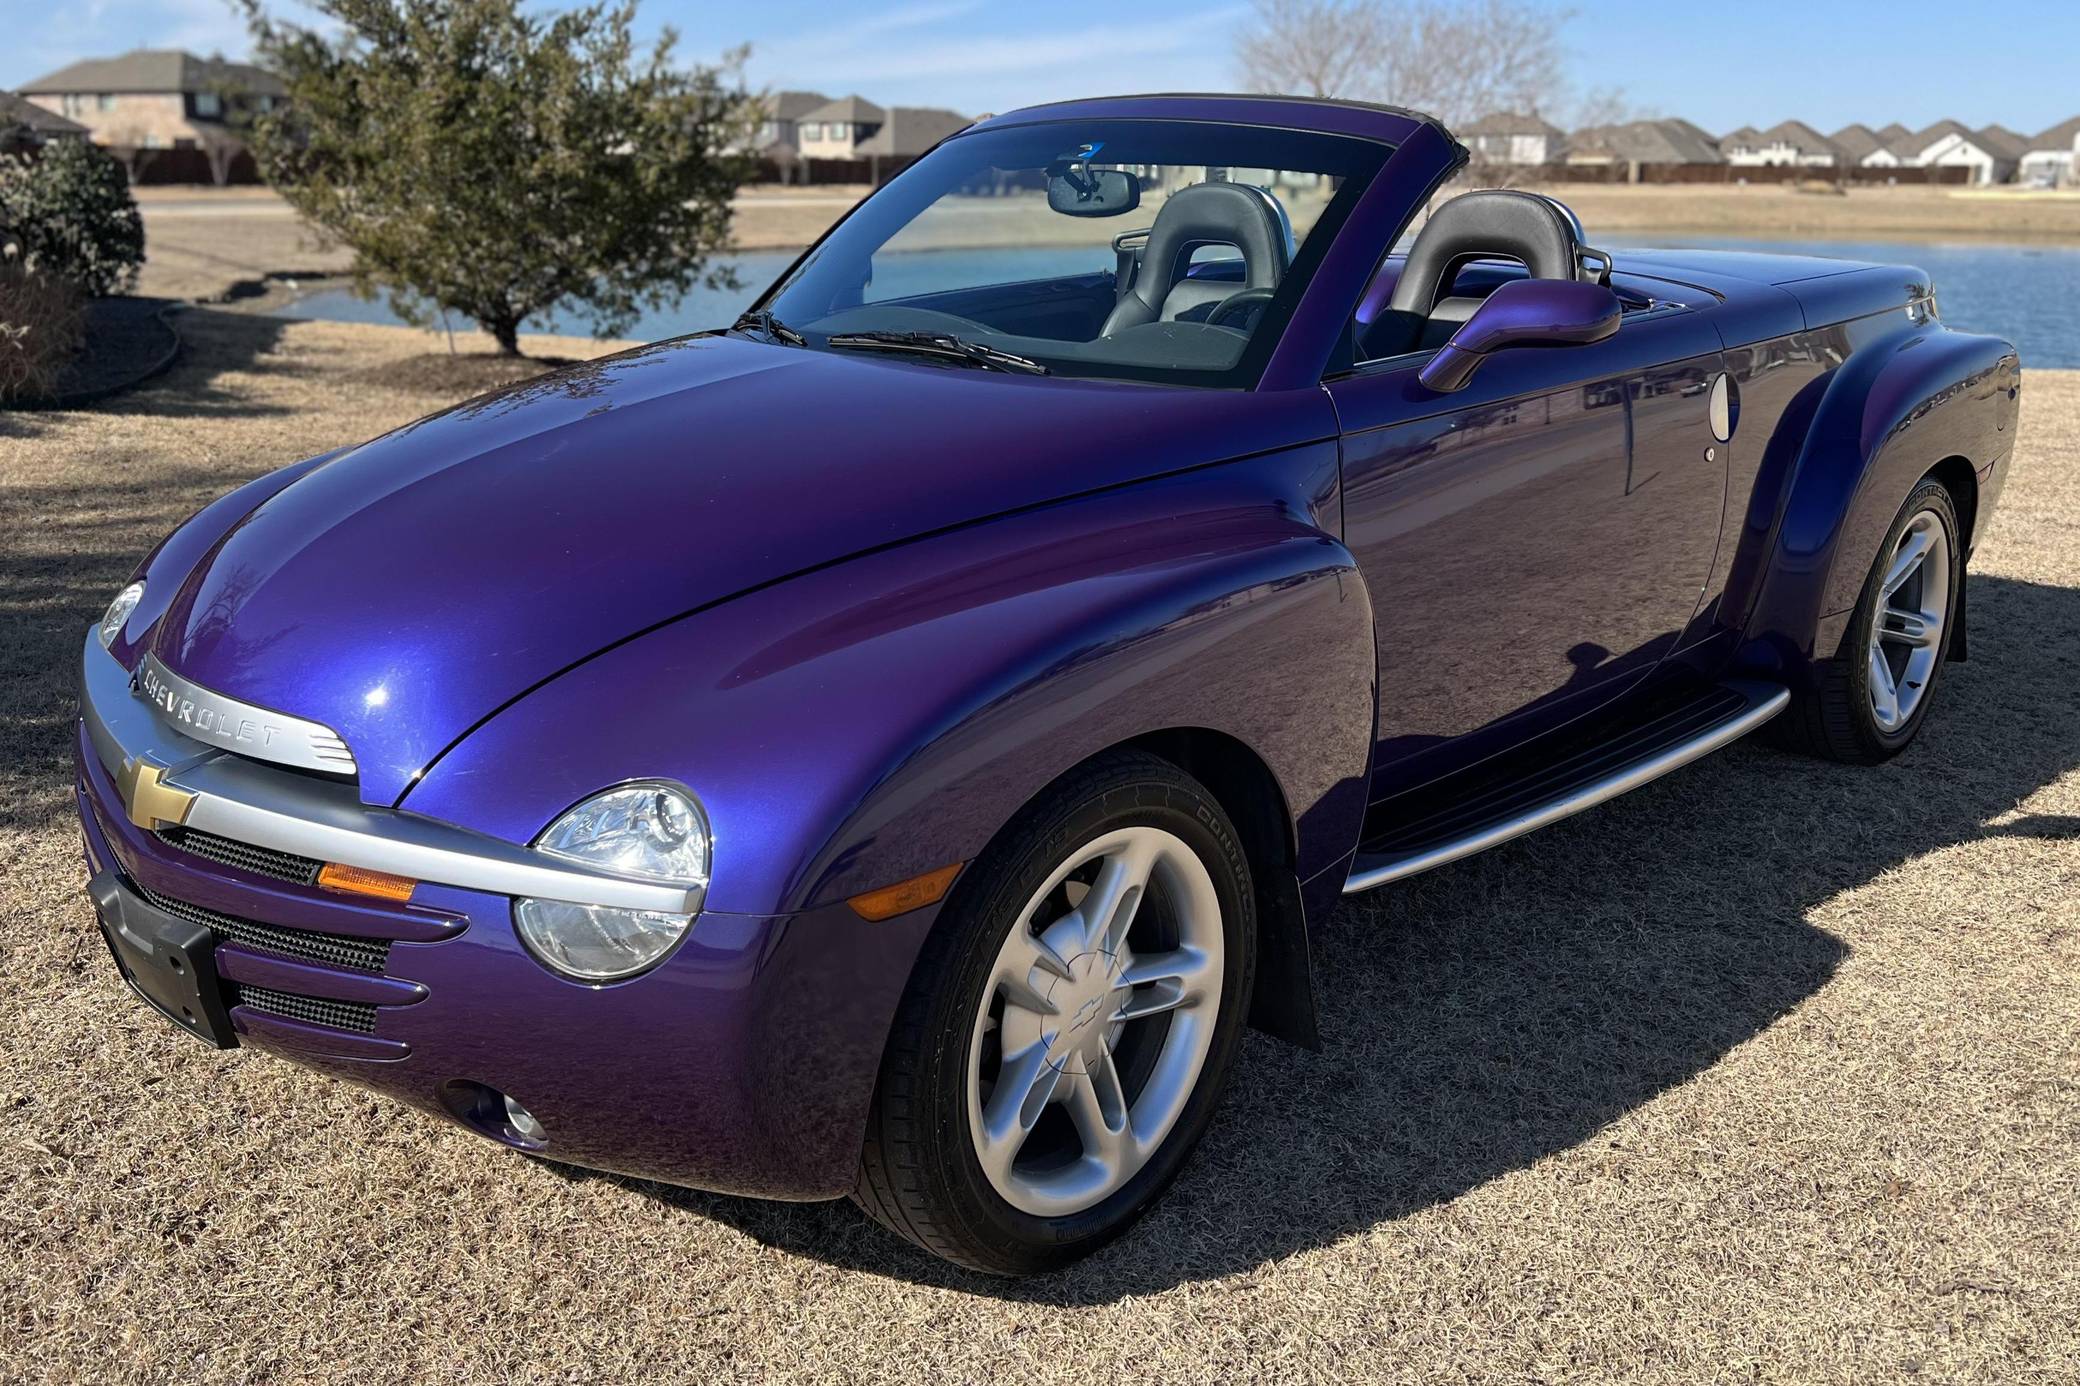 Used 2004 Chevrolet SSR For Sale at Earth MotorCars